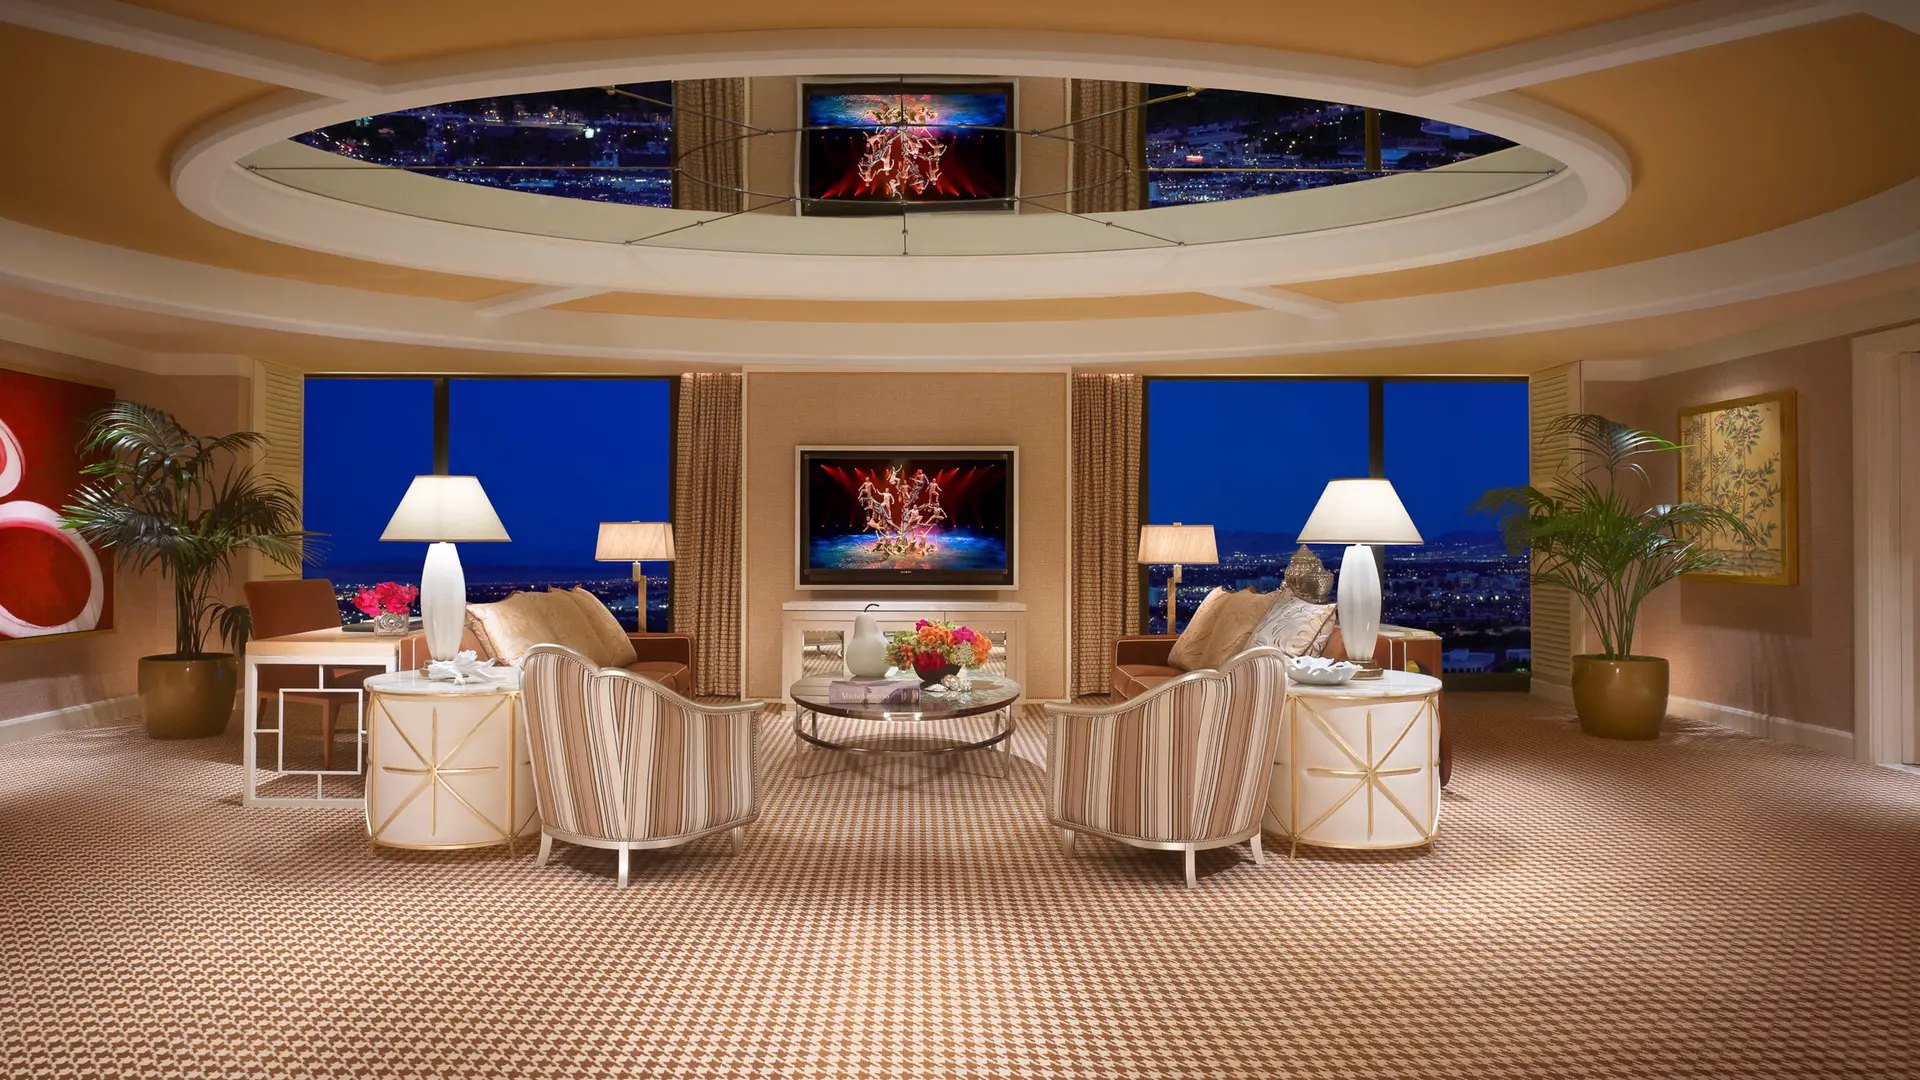 Living room at Wynn Las Vegas å Encore Resort with tv in the centre, two large windows on each side, sofas, and chaior surrounding the tv, lamps, and interior in light white and gold decor.